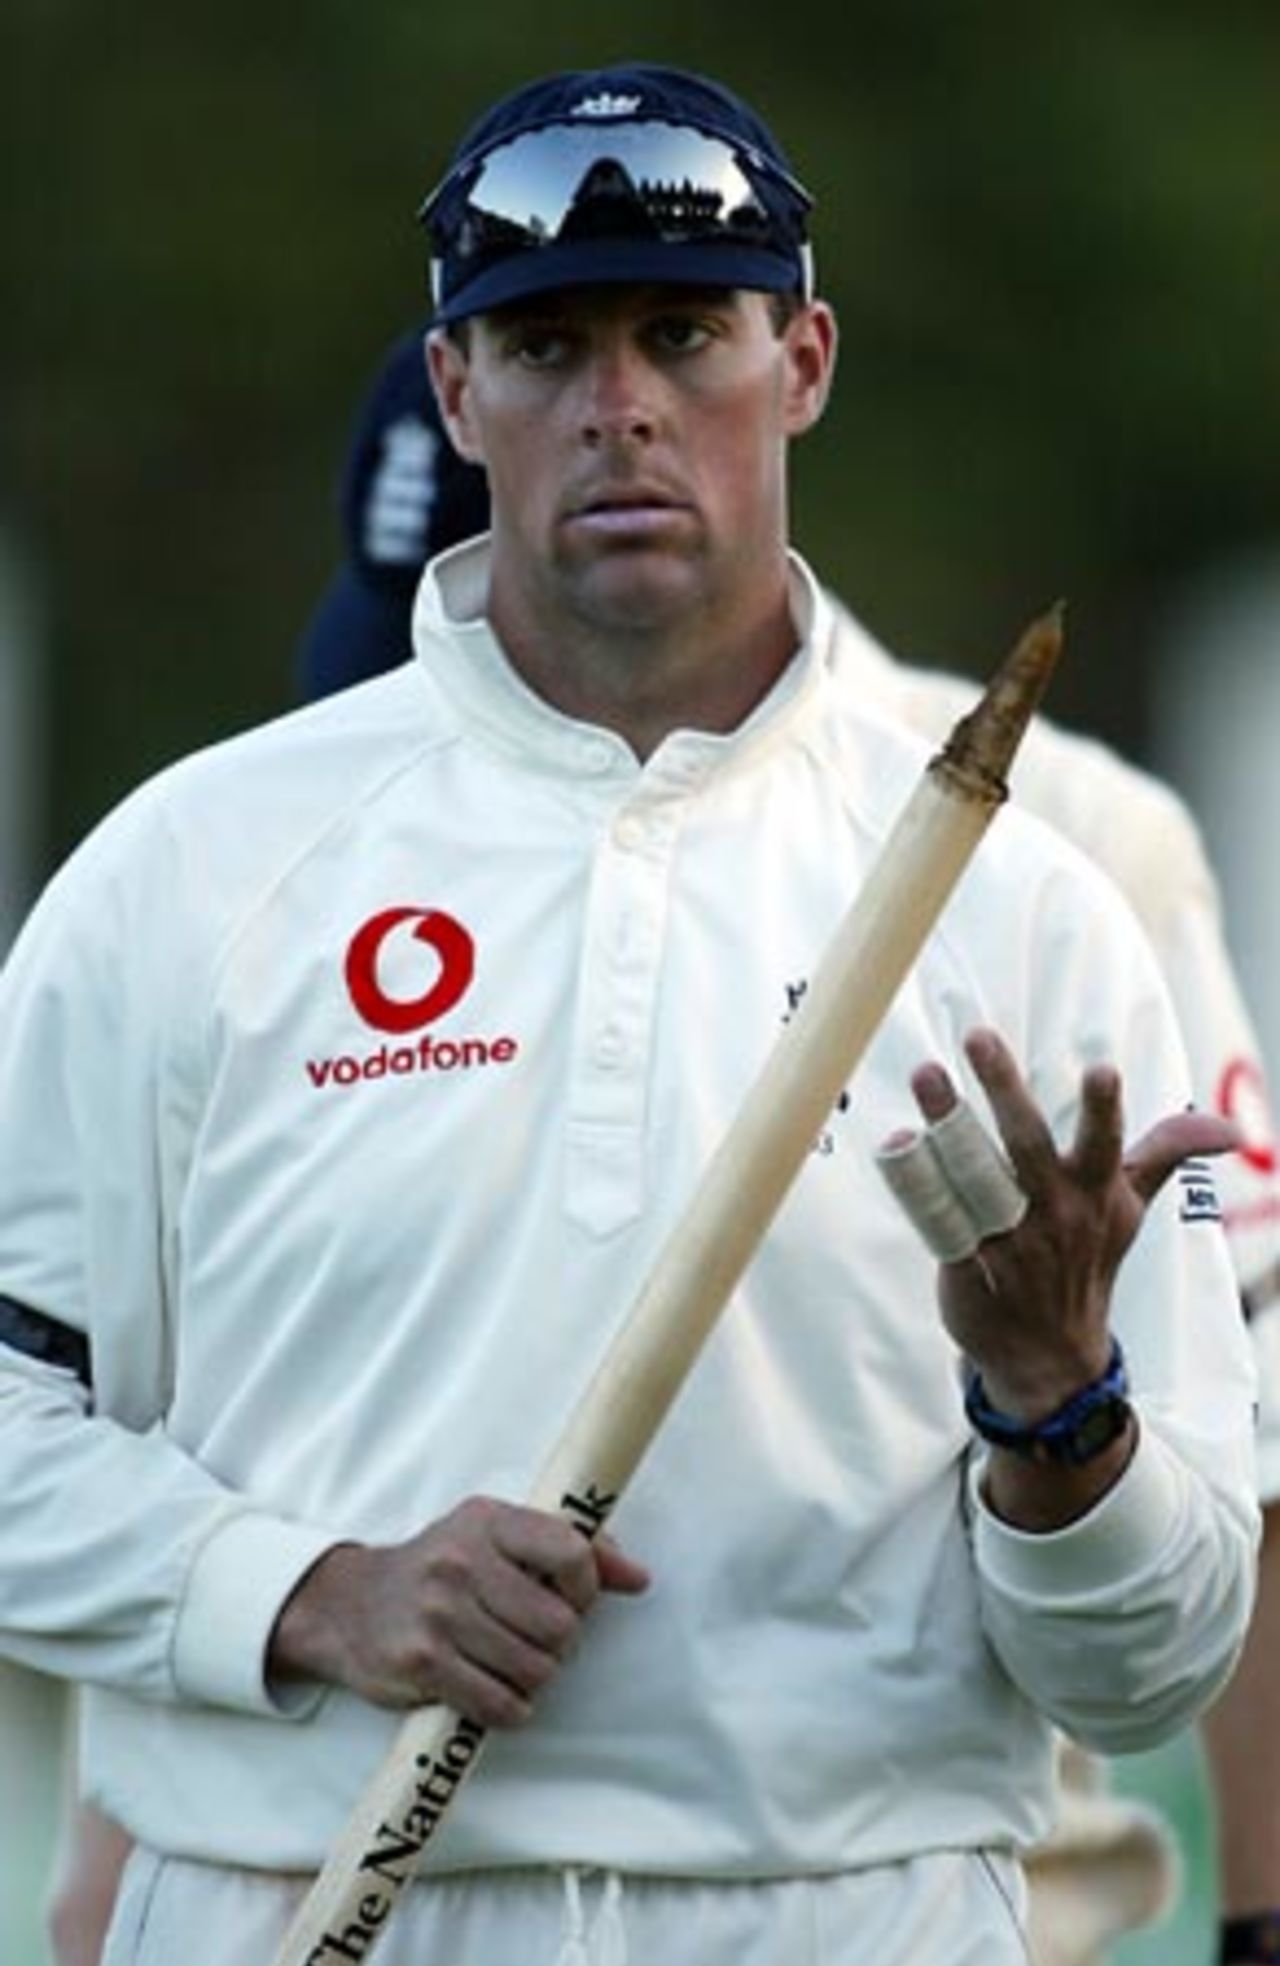 England player Marcus Trescothick leaves the field with stump in hand at the end of the match. 2nd Test: New Zealand v England at Basin Reserve, Wellington, 21-25 March 2002 (25 March 2002).